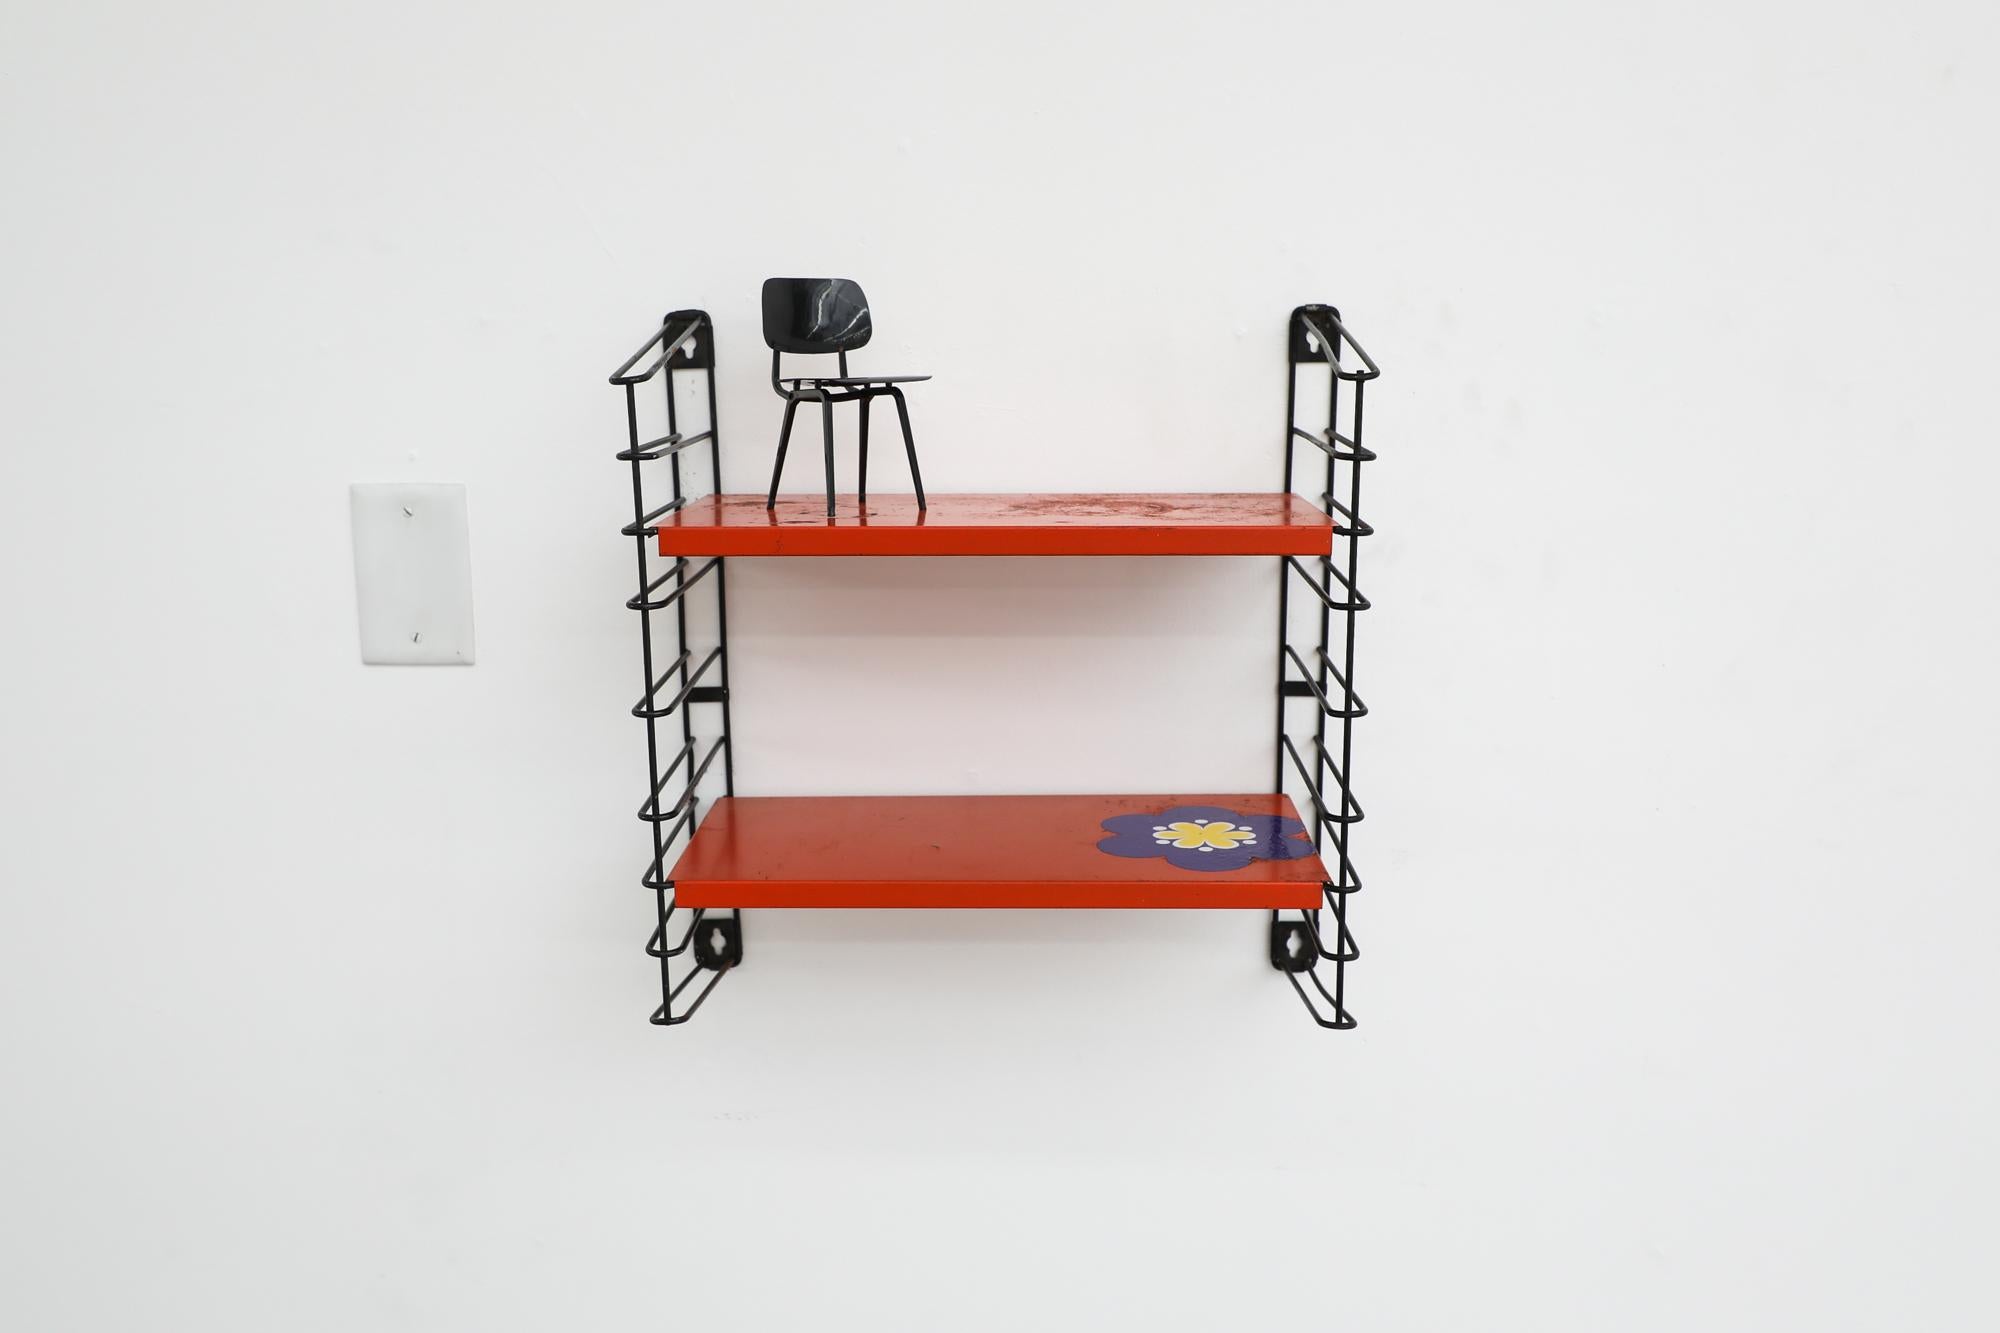 Mid-Century Tomado industrial shelving unit with red sheet metal shelves on black enameled wire risers. One shelf comes with a flower sticker! In original condition with some visible wear and enamel loss consistent with age and use. Other similar